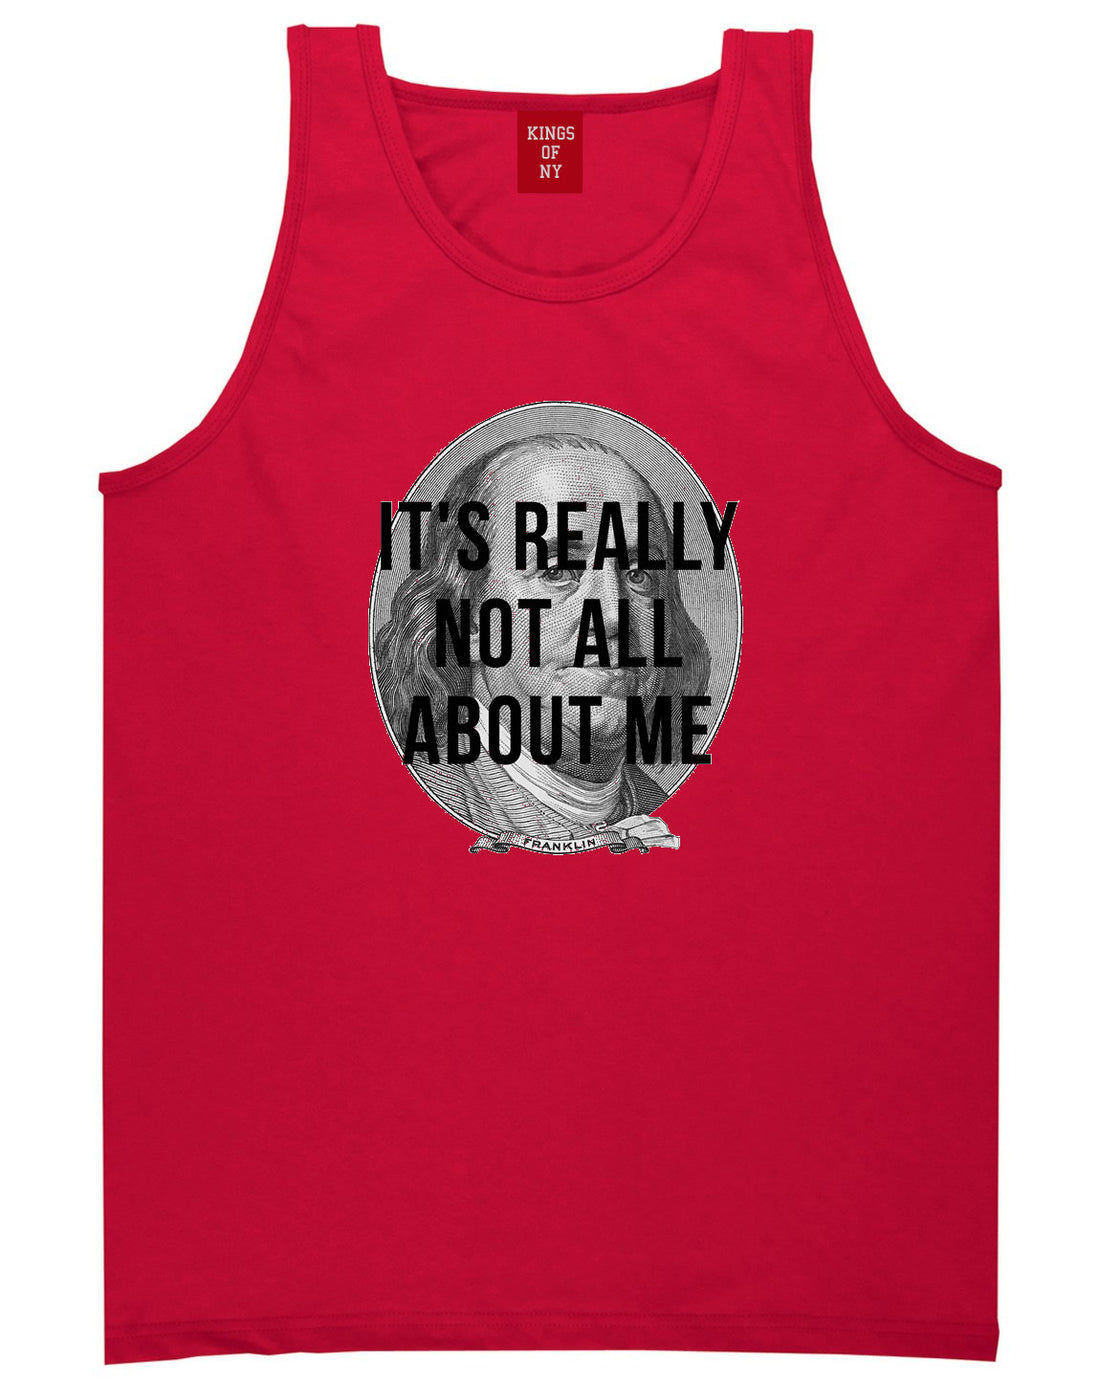 Benjamins Money Hiphop Flow Dollar Cash Tank Top In Red by Kings Of NY